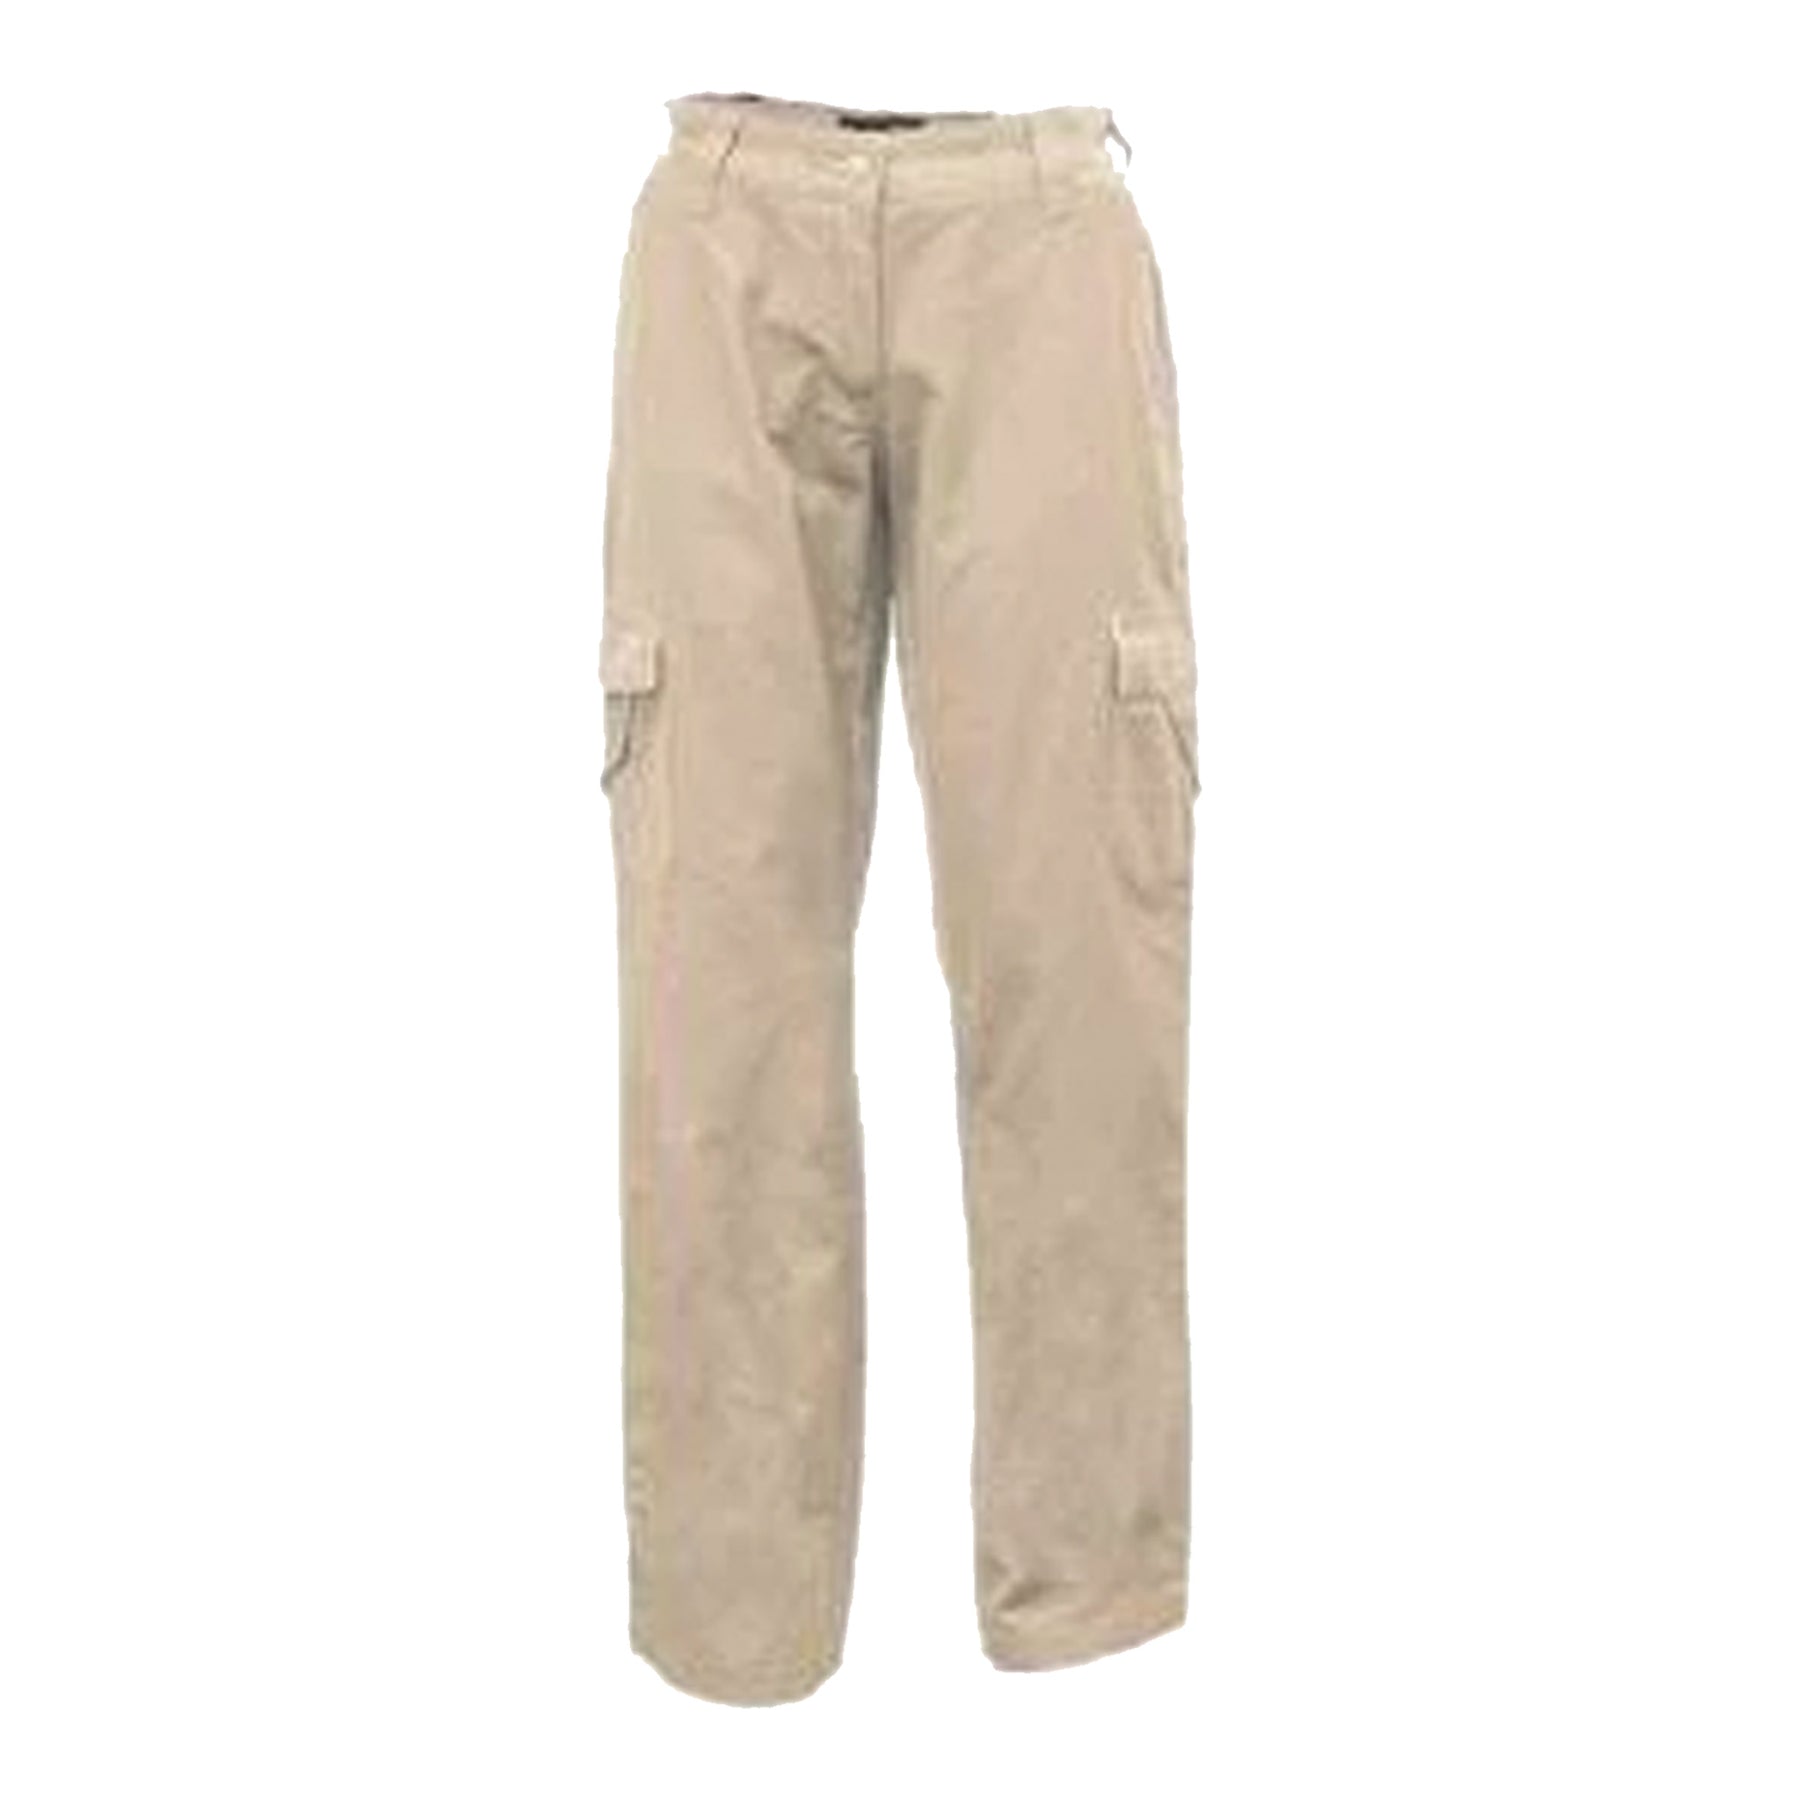 MATERNITY - CARGO COTTON DRILL PANT - WPL081